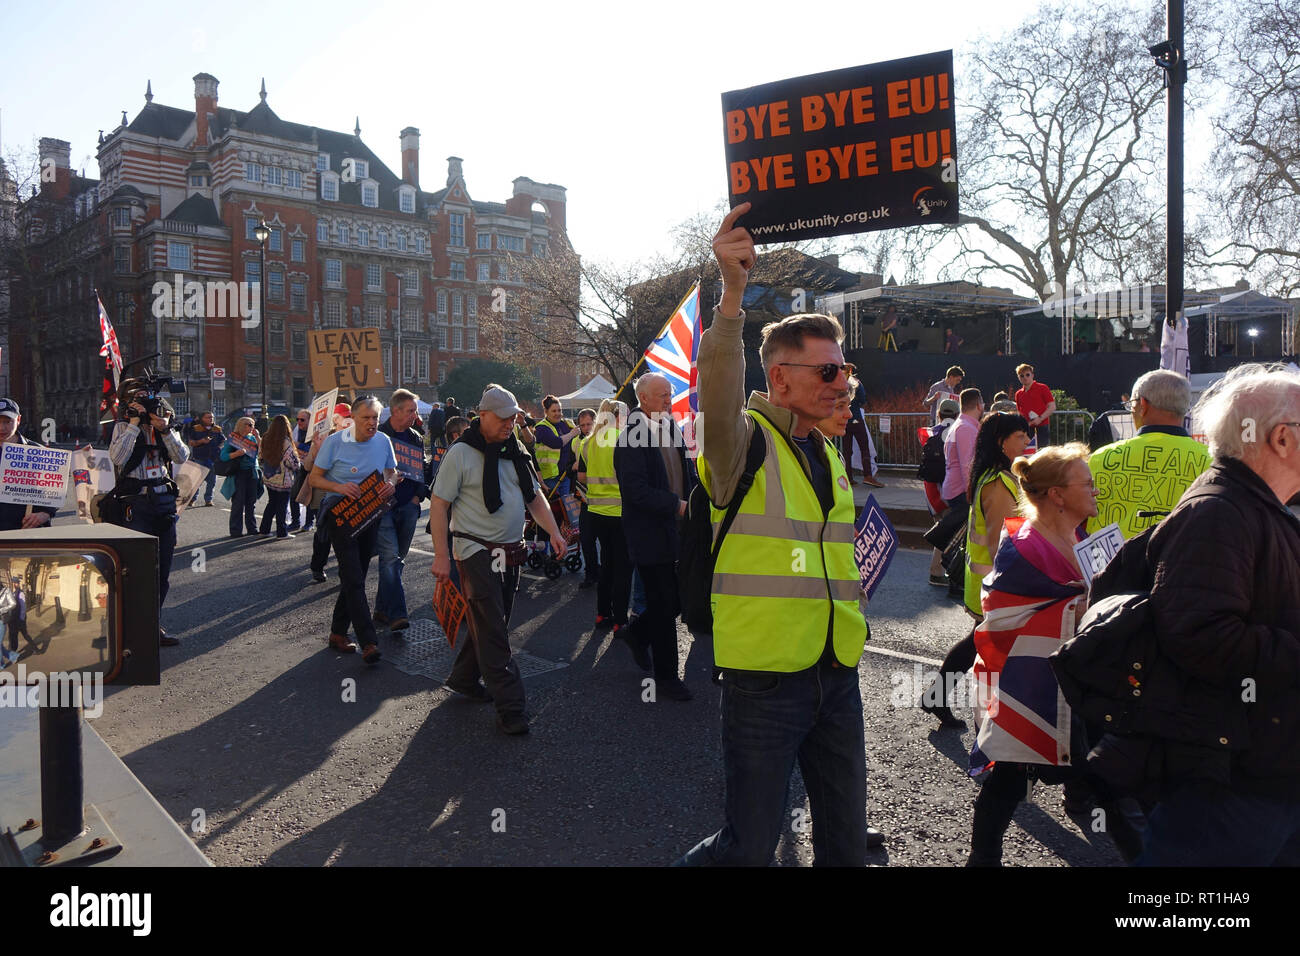 Westminster, London, UK. 27th Feb 2019. Pro-Brexit Activists demonstrate in Westminster, London. Credit: Thomas Krych/Alamy Live News Stock Photo